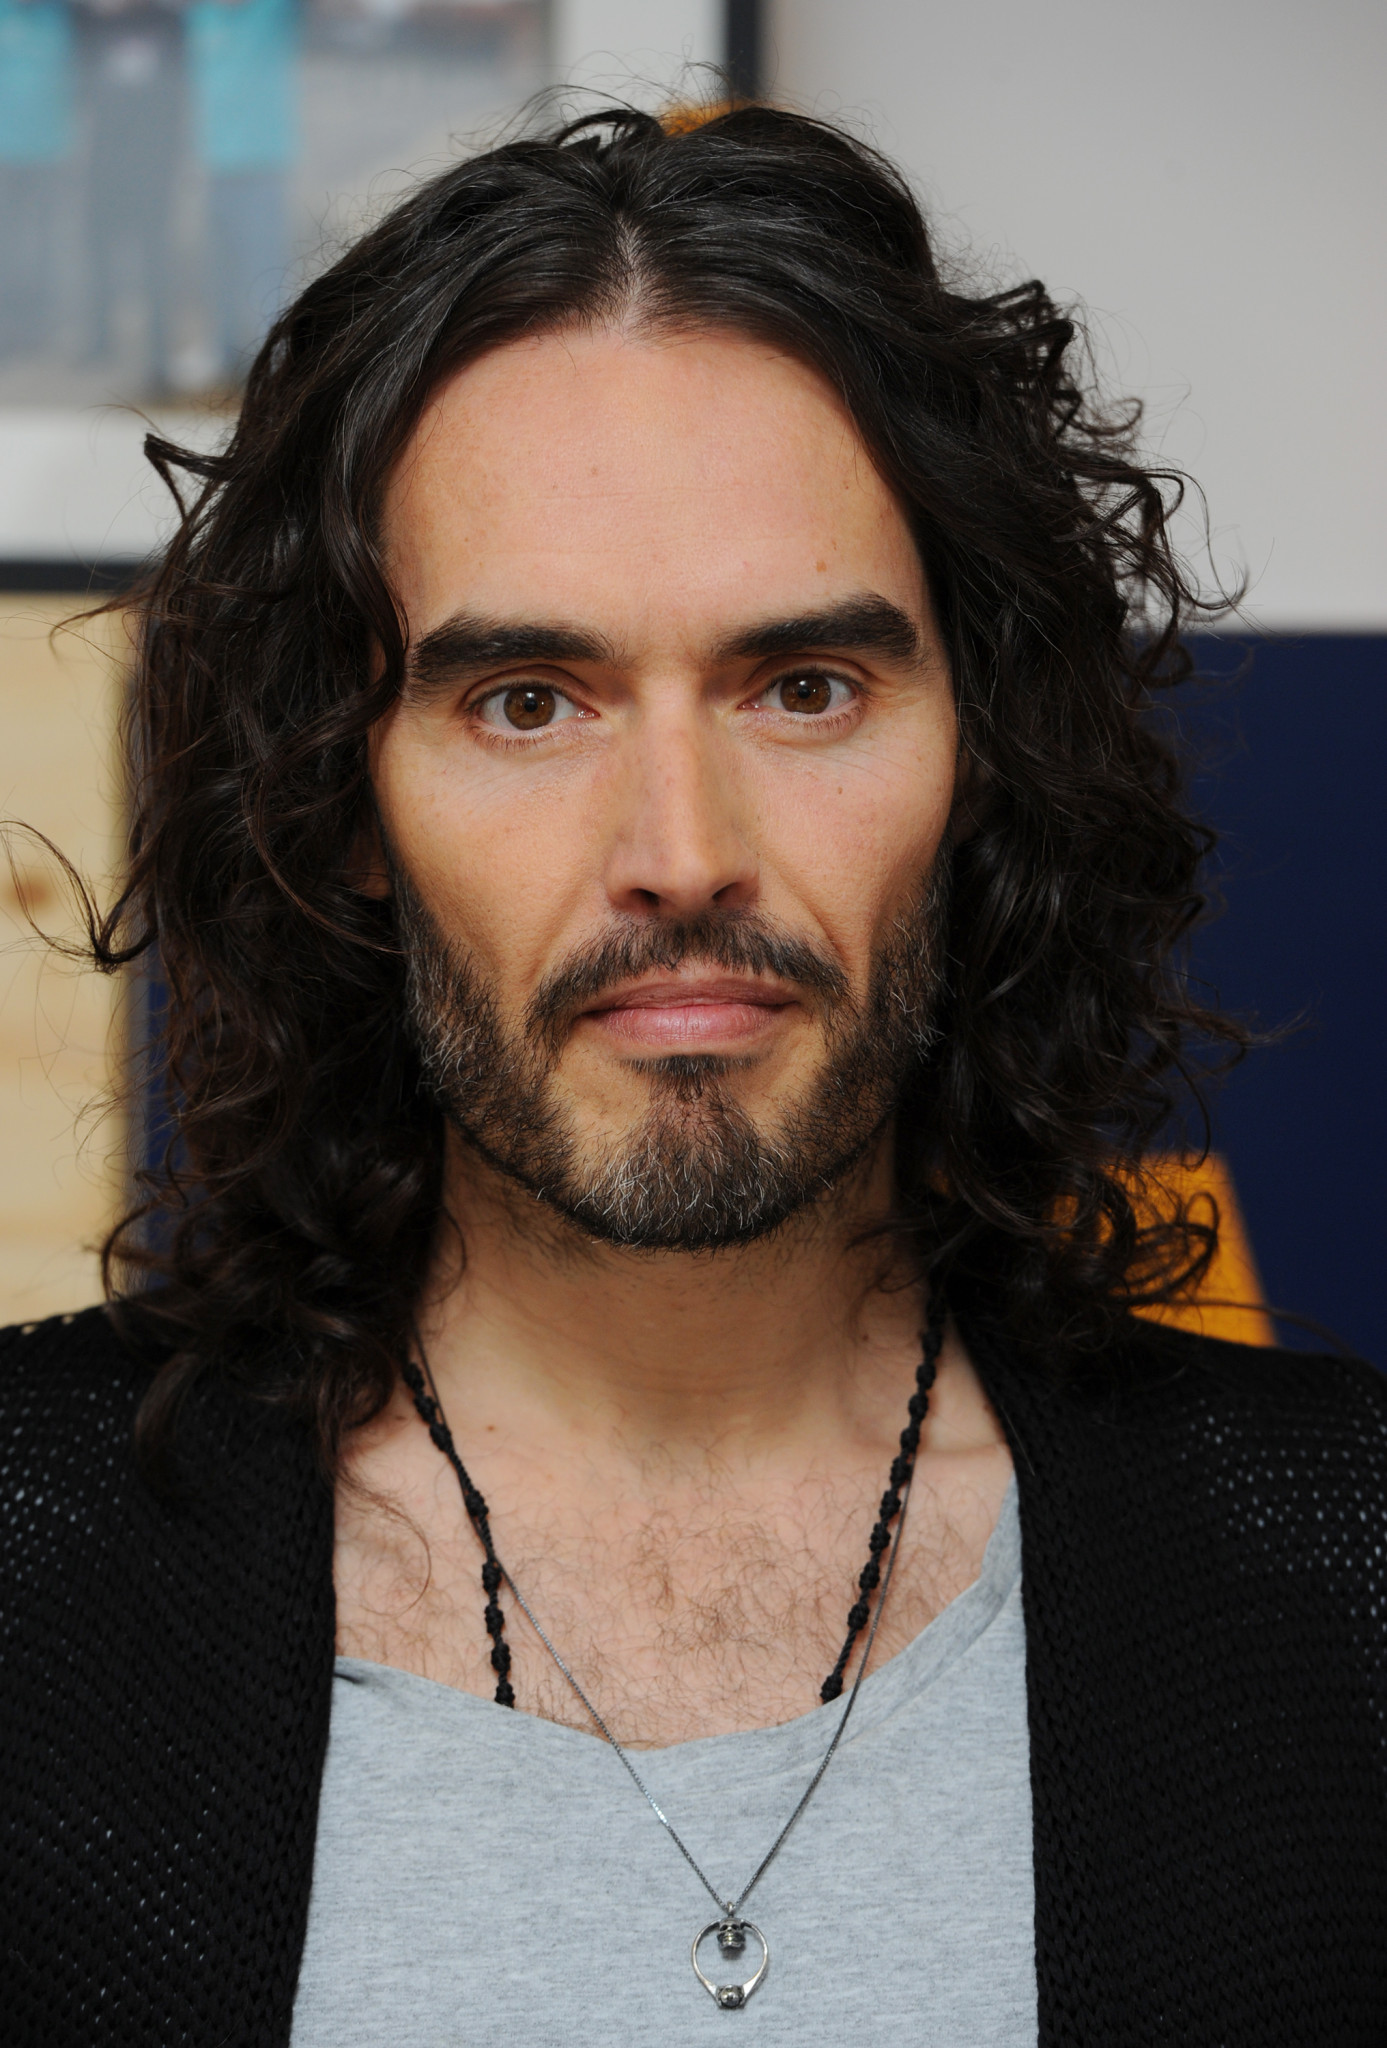 Russell Brand has denied all the allegations made against him ©Getty Images